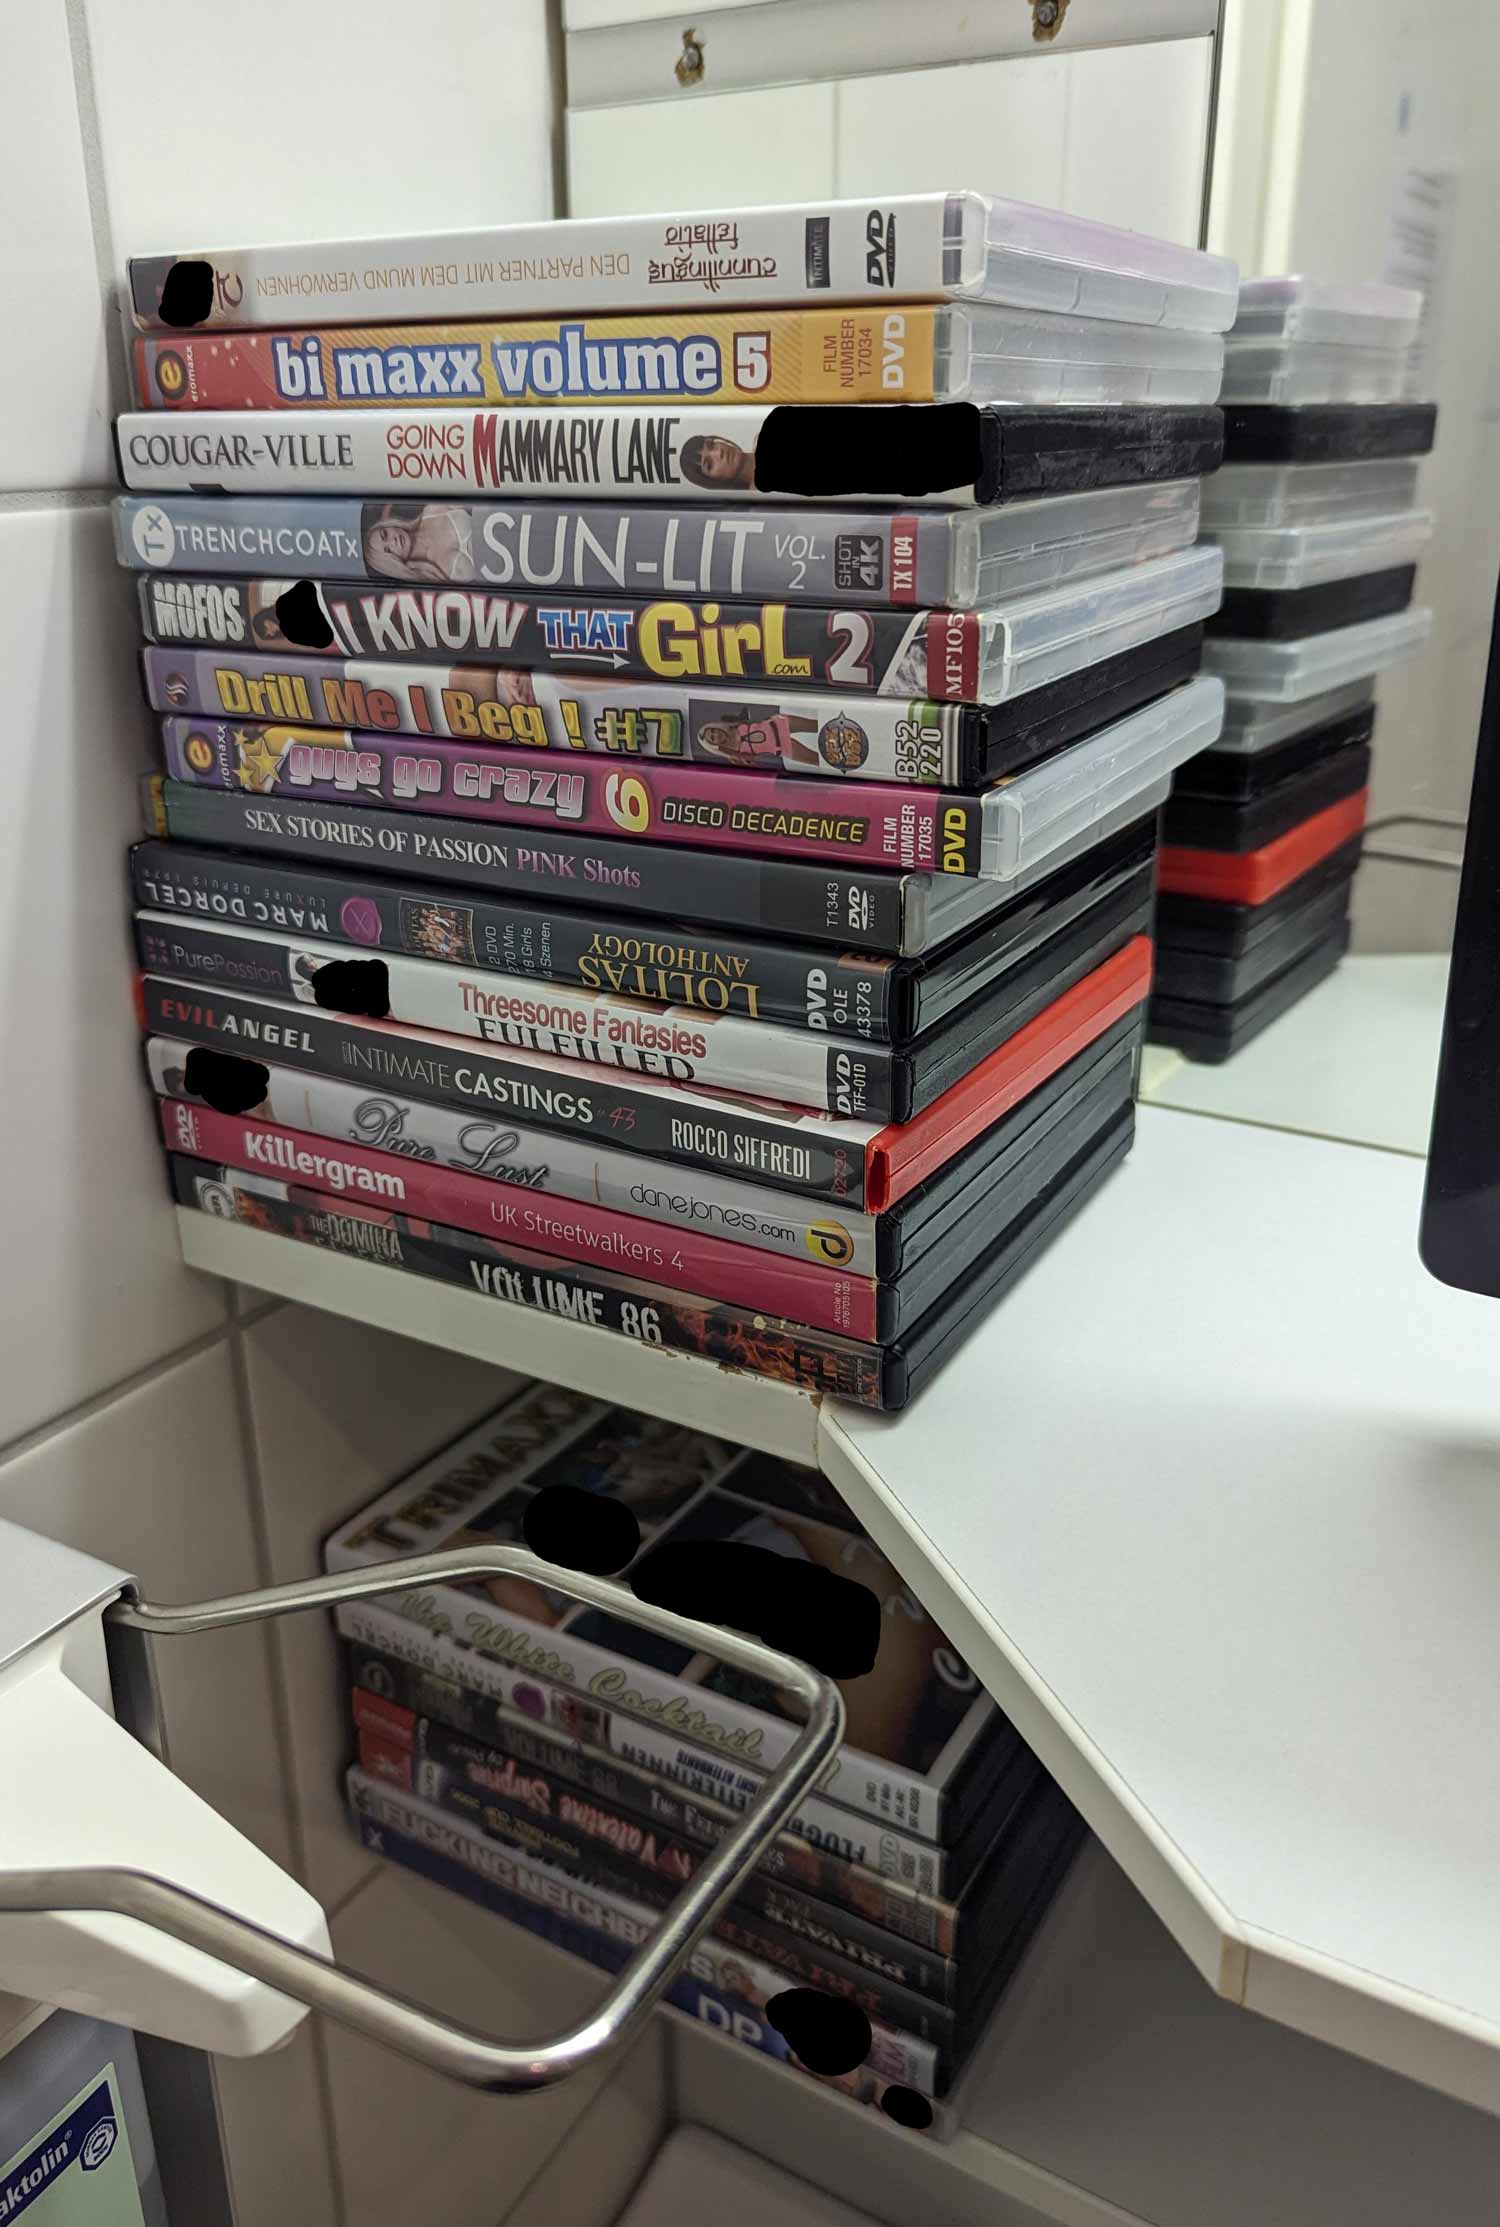 These DVDs provided for donors in the sperm bank